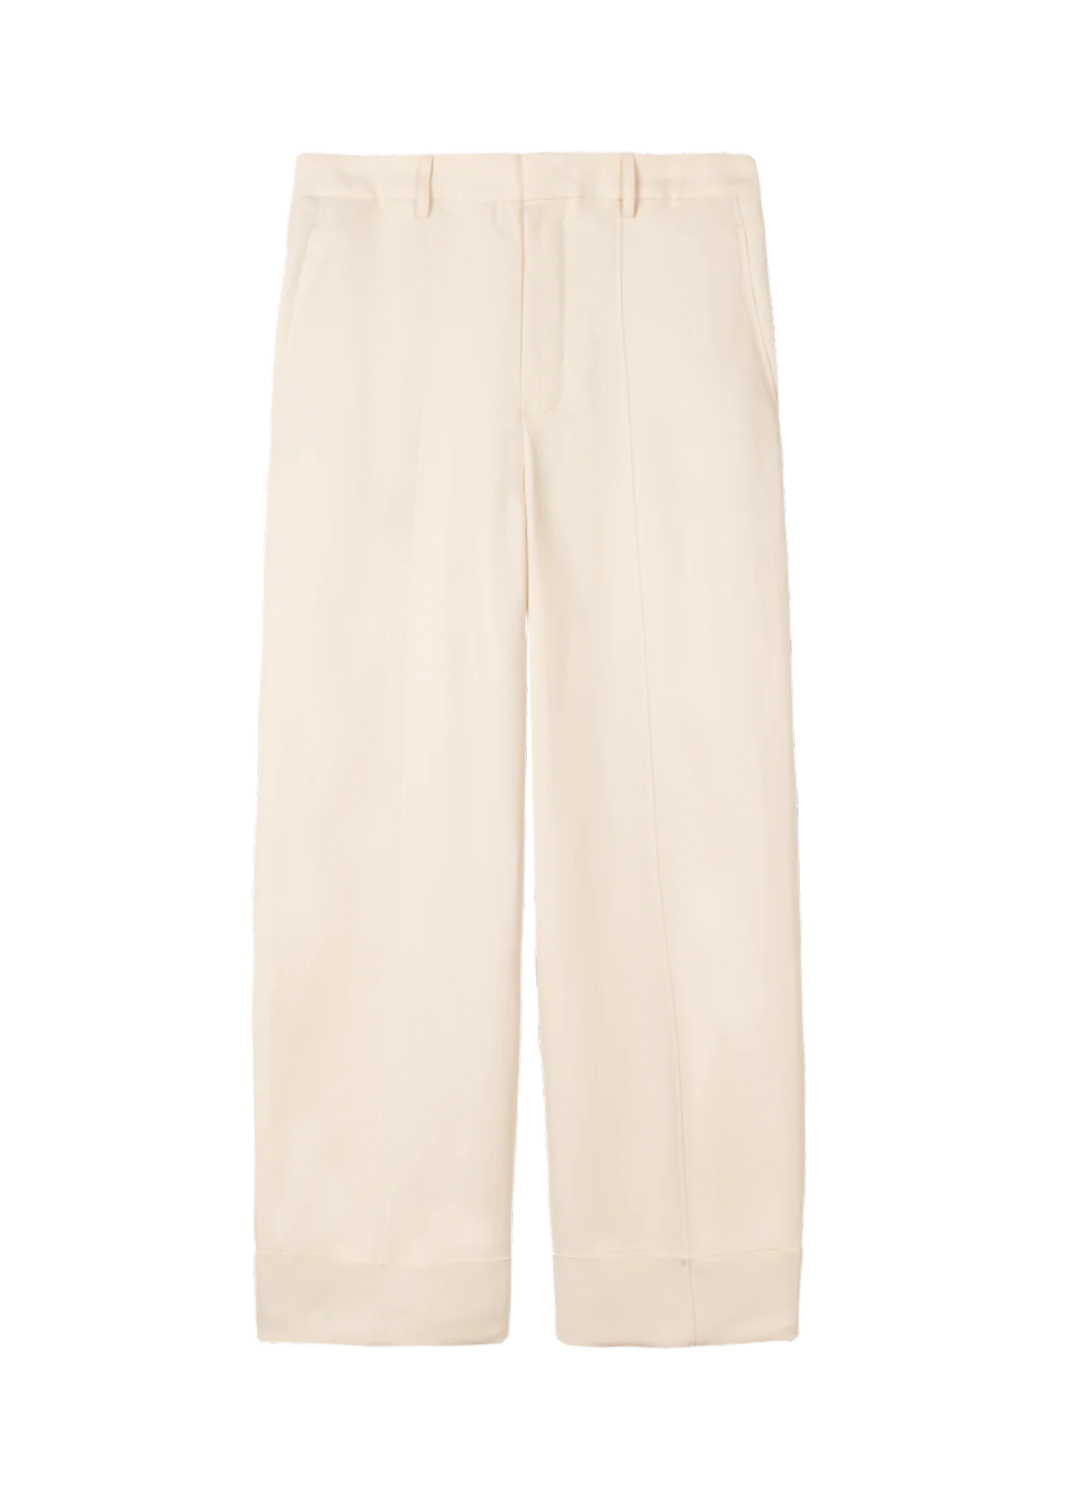 Tapered linen trousers